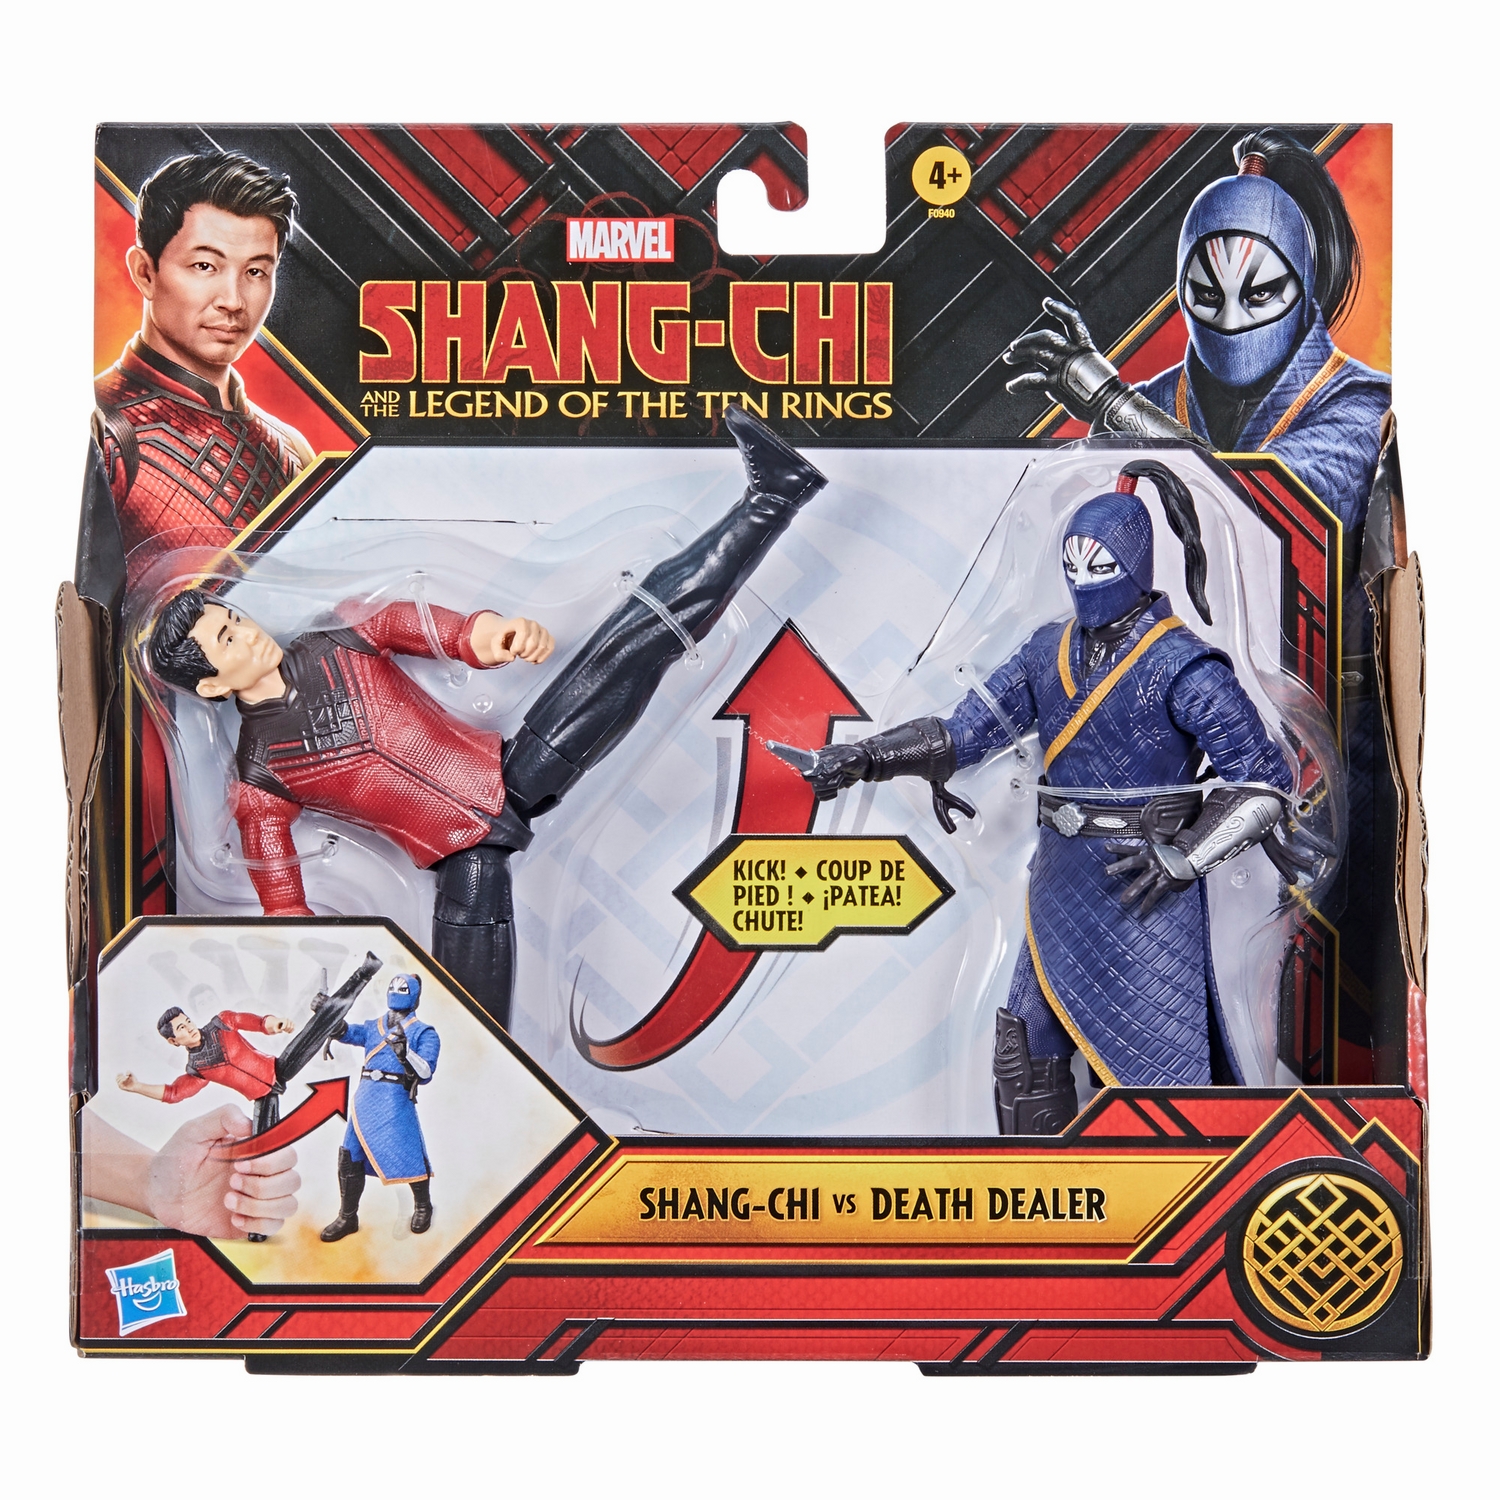 MARVEL SHANG-CHI AND THE LEGEND OF THE TEN RINGS 6-INCH BATTLE PACK Figures - pckging (2).jpg